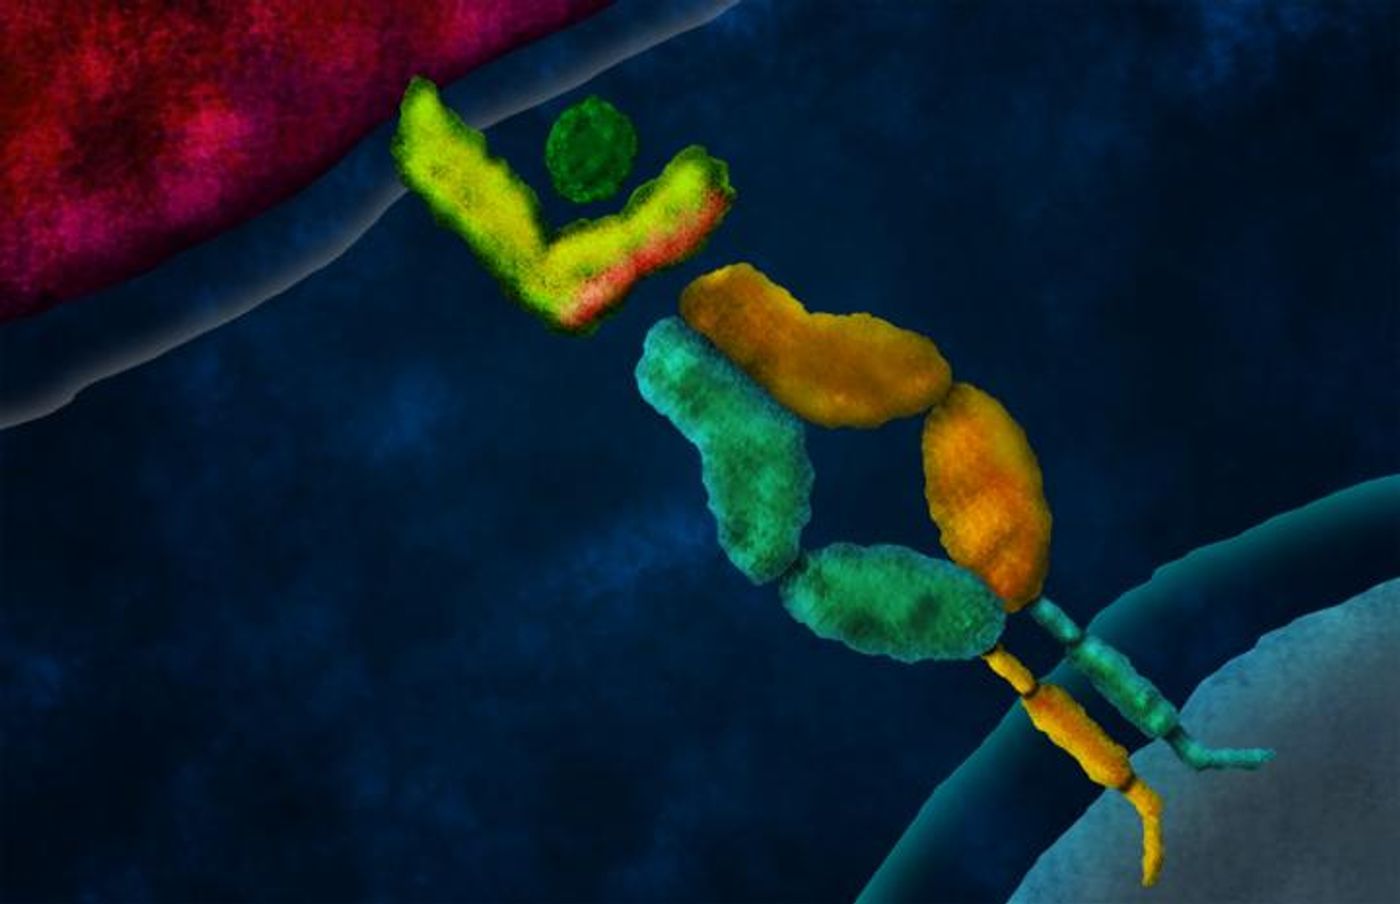 Artist's concept of a domain-swapped T cell receptor (TCR) engaging a peptide presented by a tumor cell on a major histocompatibility complex (MHC) molecule. Credit: Caltech